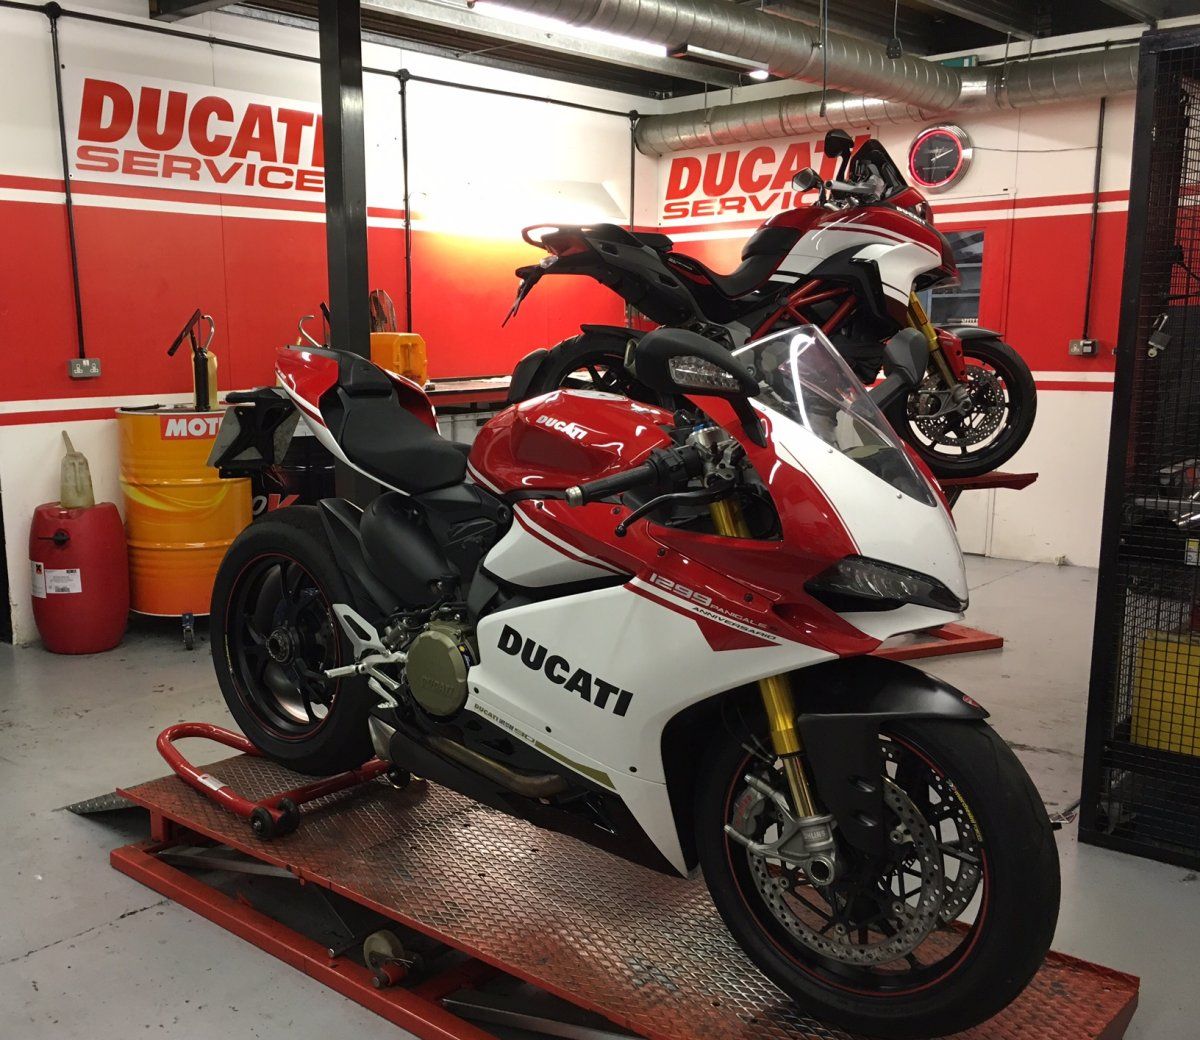 Two Ducati motorcycles on work benches in a repair shop